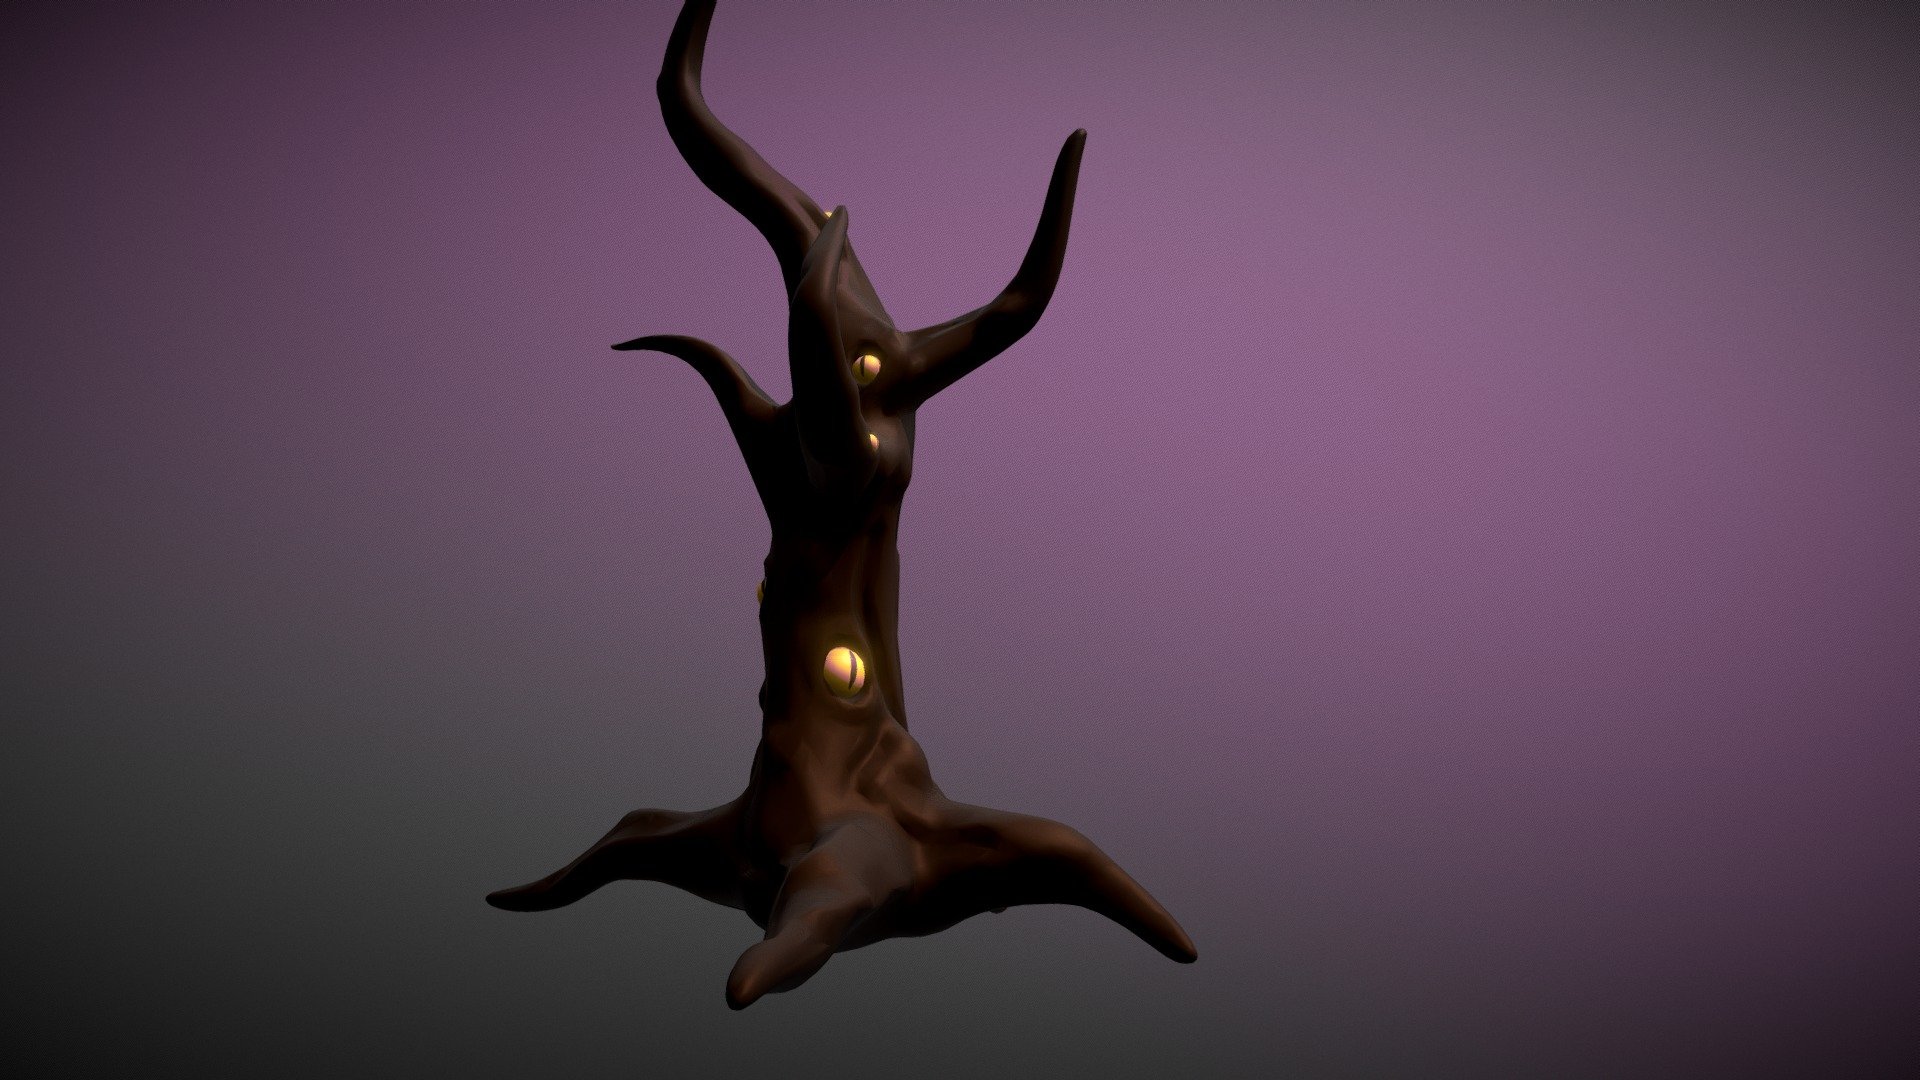 Model of the eye tree in my game project Eye of the Nightmare. 
Project can be found here: https://surfervelocity.com/eye-of-the-nightmare/ - Eye trees - 3D model by SurferVelocity 3d model